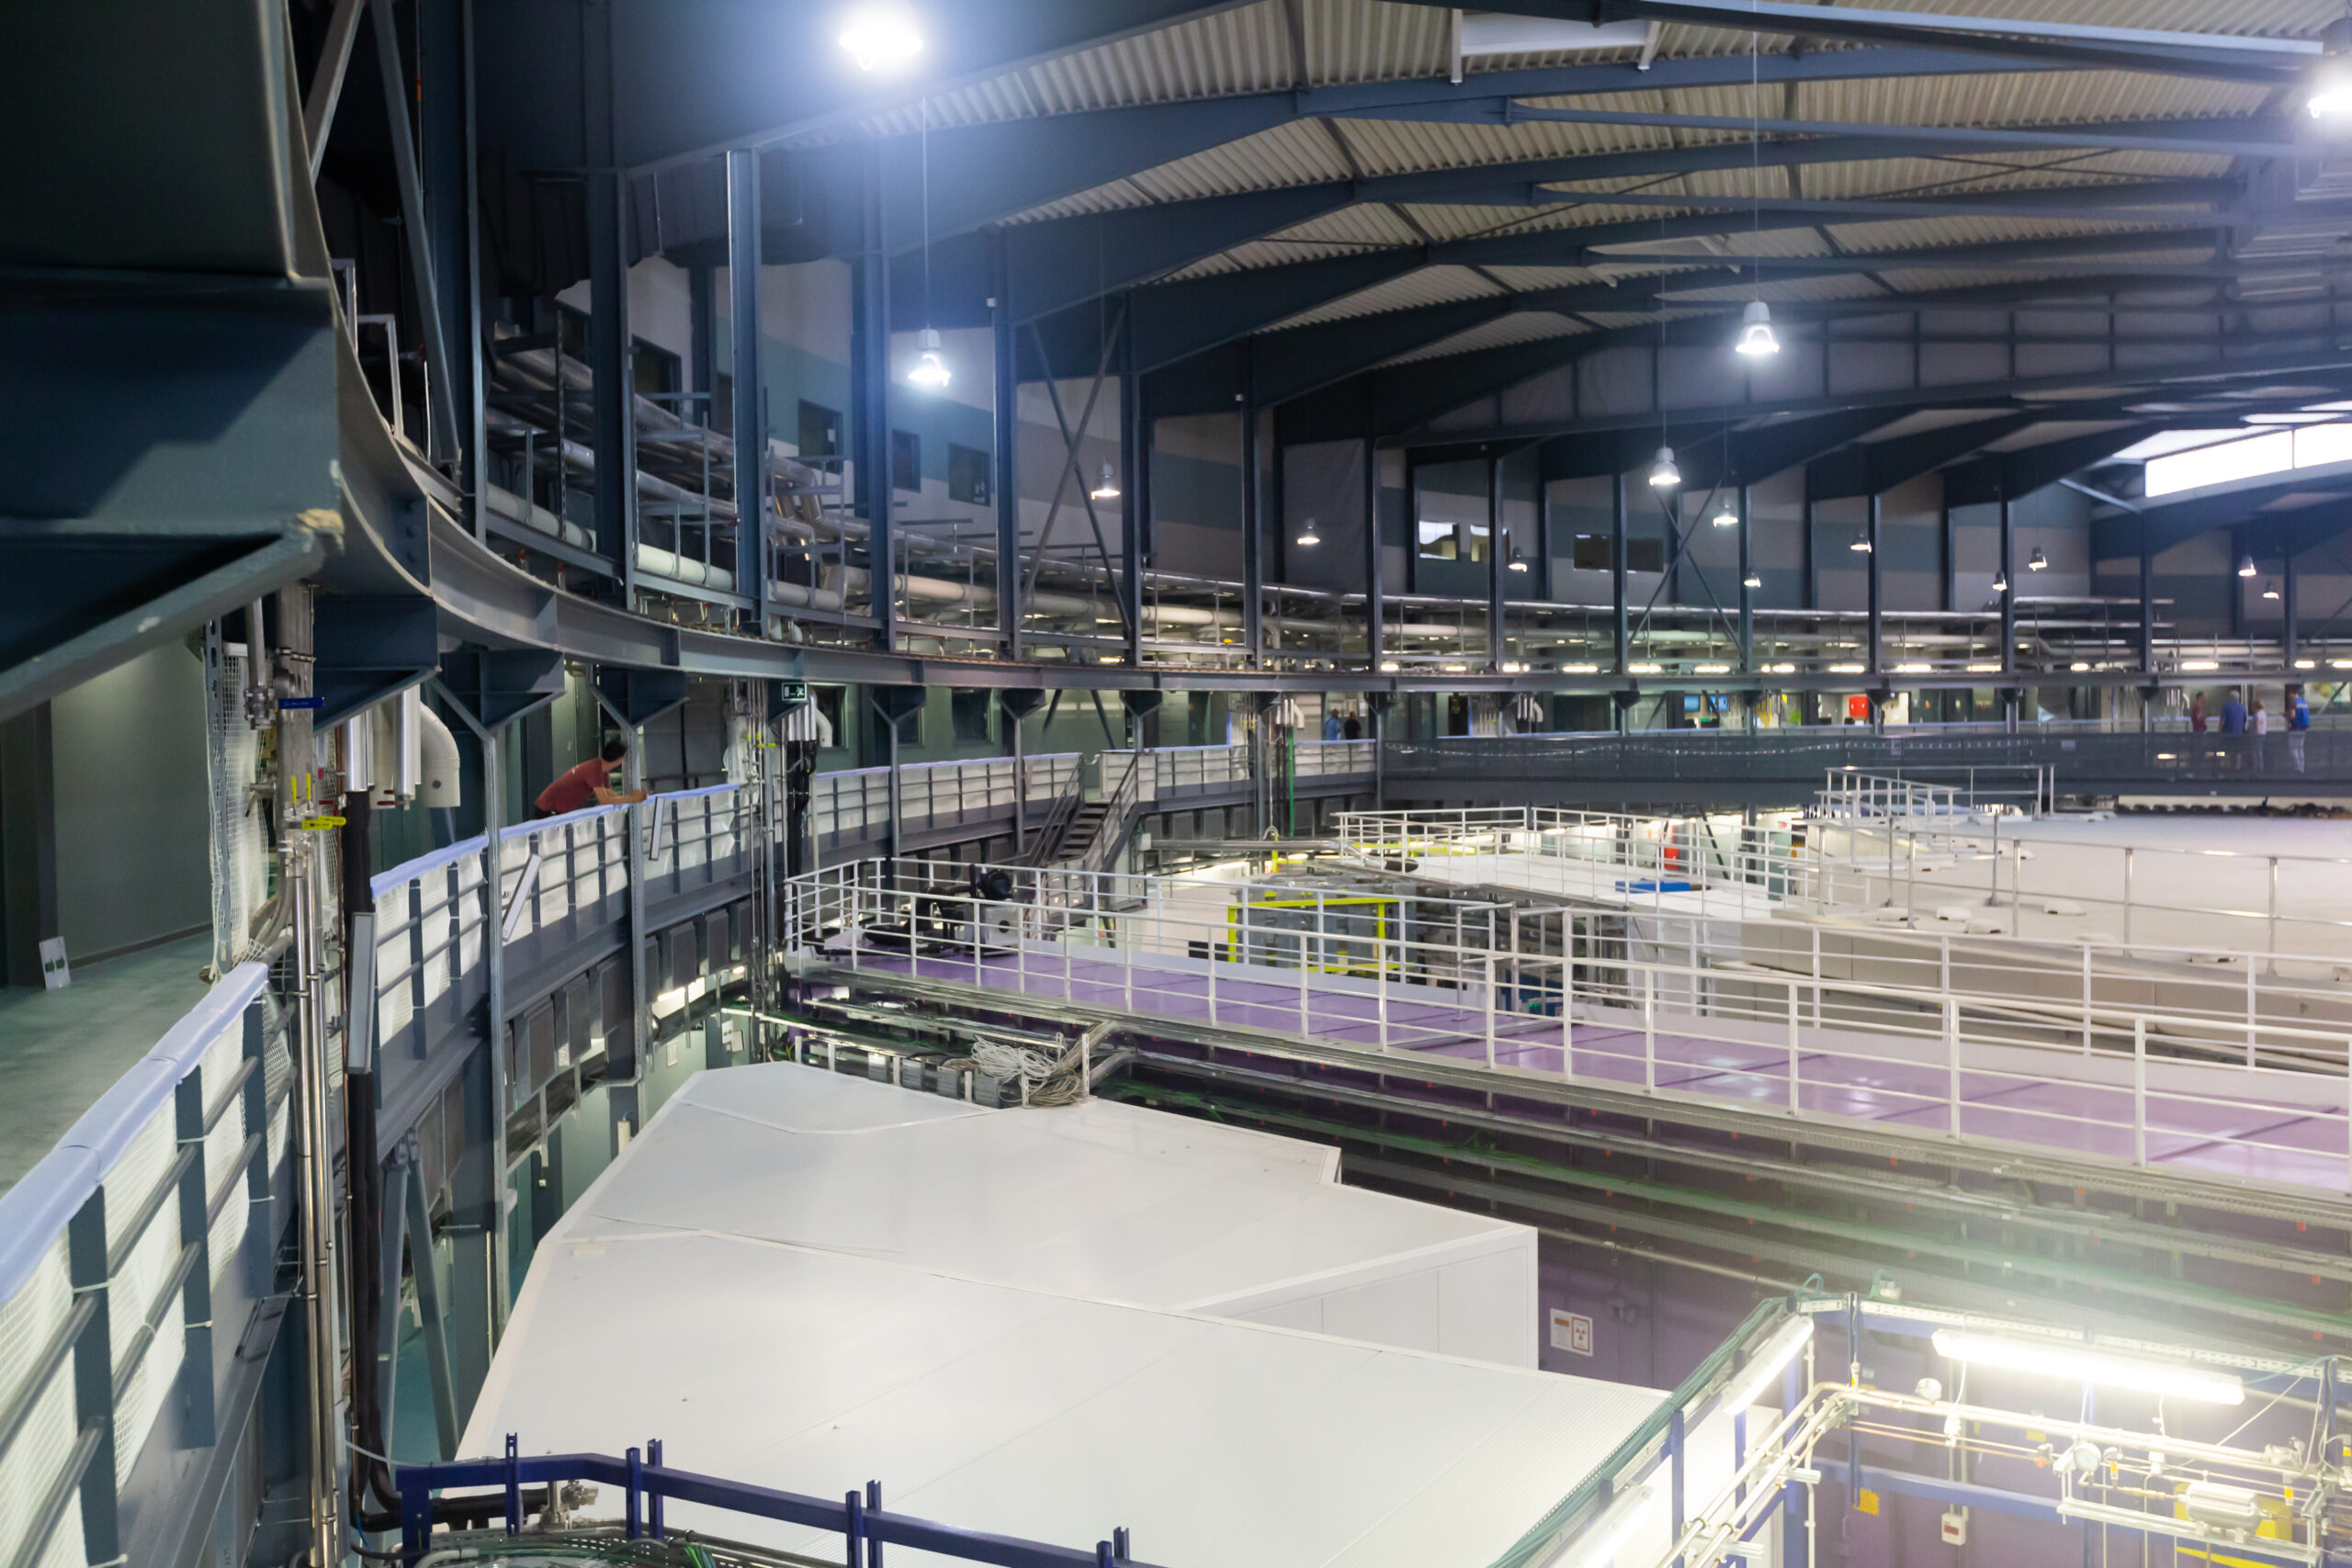 CERDANYOLA DEL VALLES, SPAIN - JUNE 29, 2019: Inside view of building and equipment of ALBA synchrotron radiation facility in Barcelona Synchrotron Park